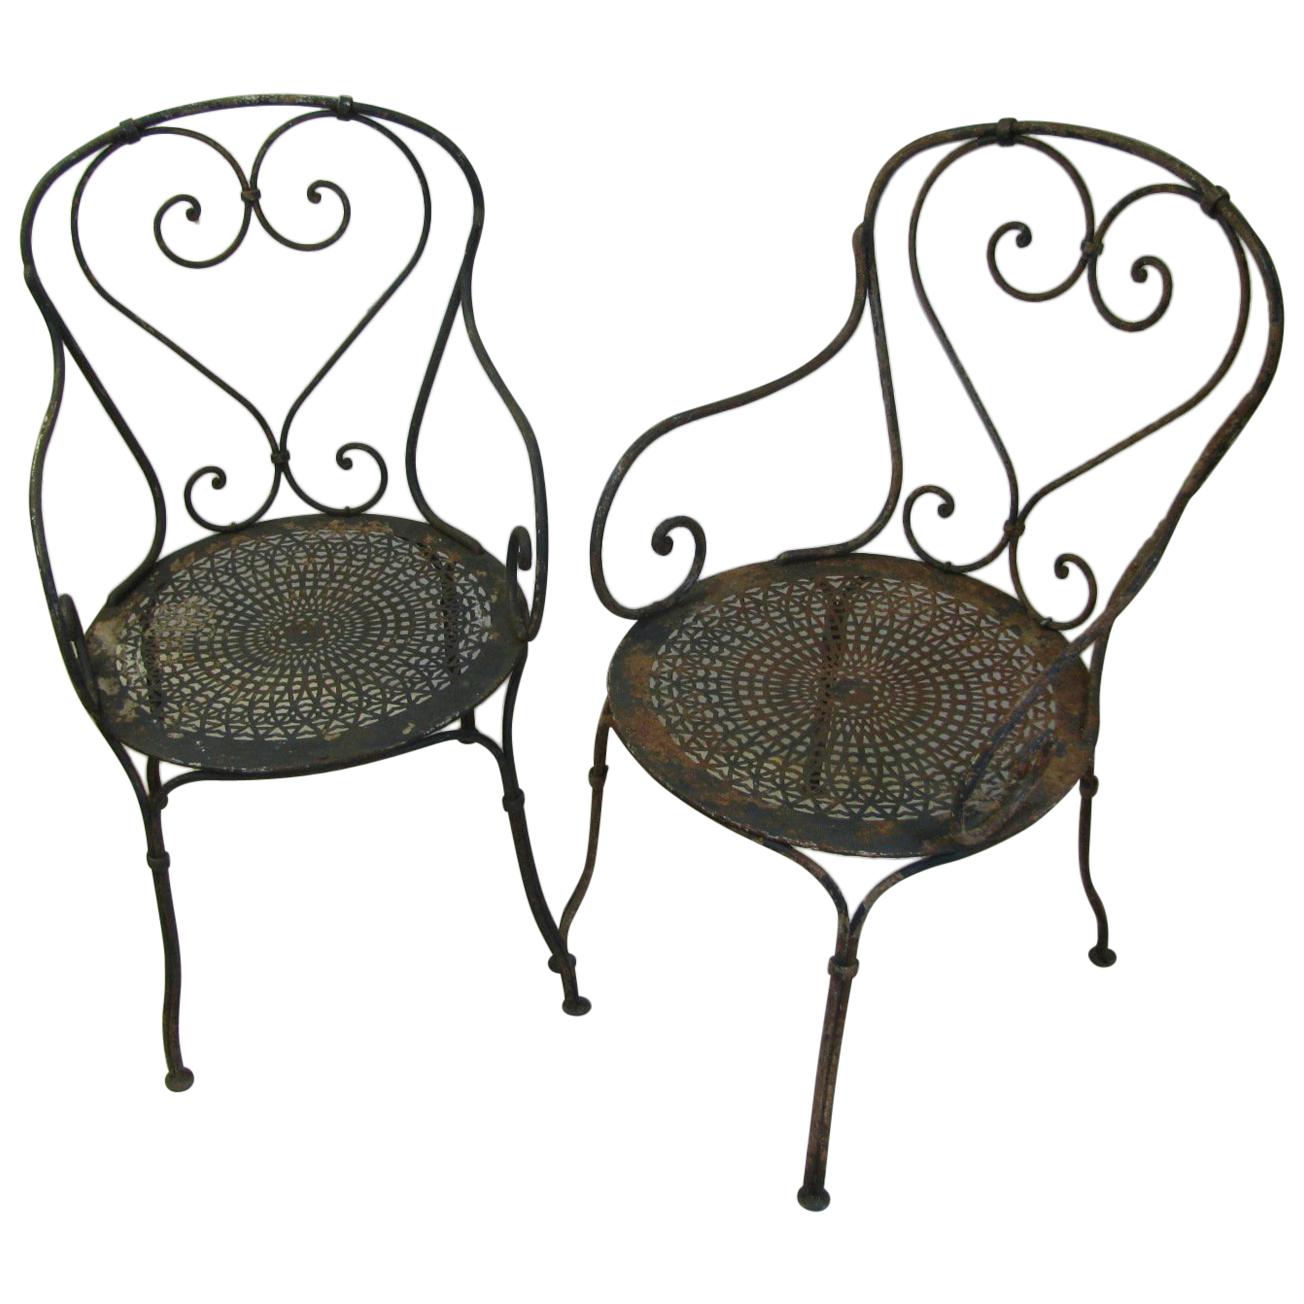 Pair of circa 1940, French Iron with Pierced Metal Seats Garden Chairs